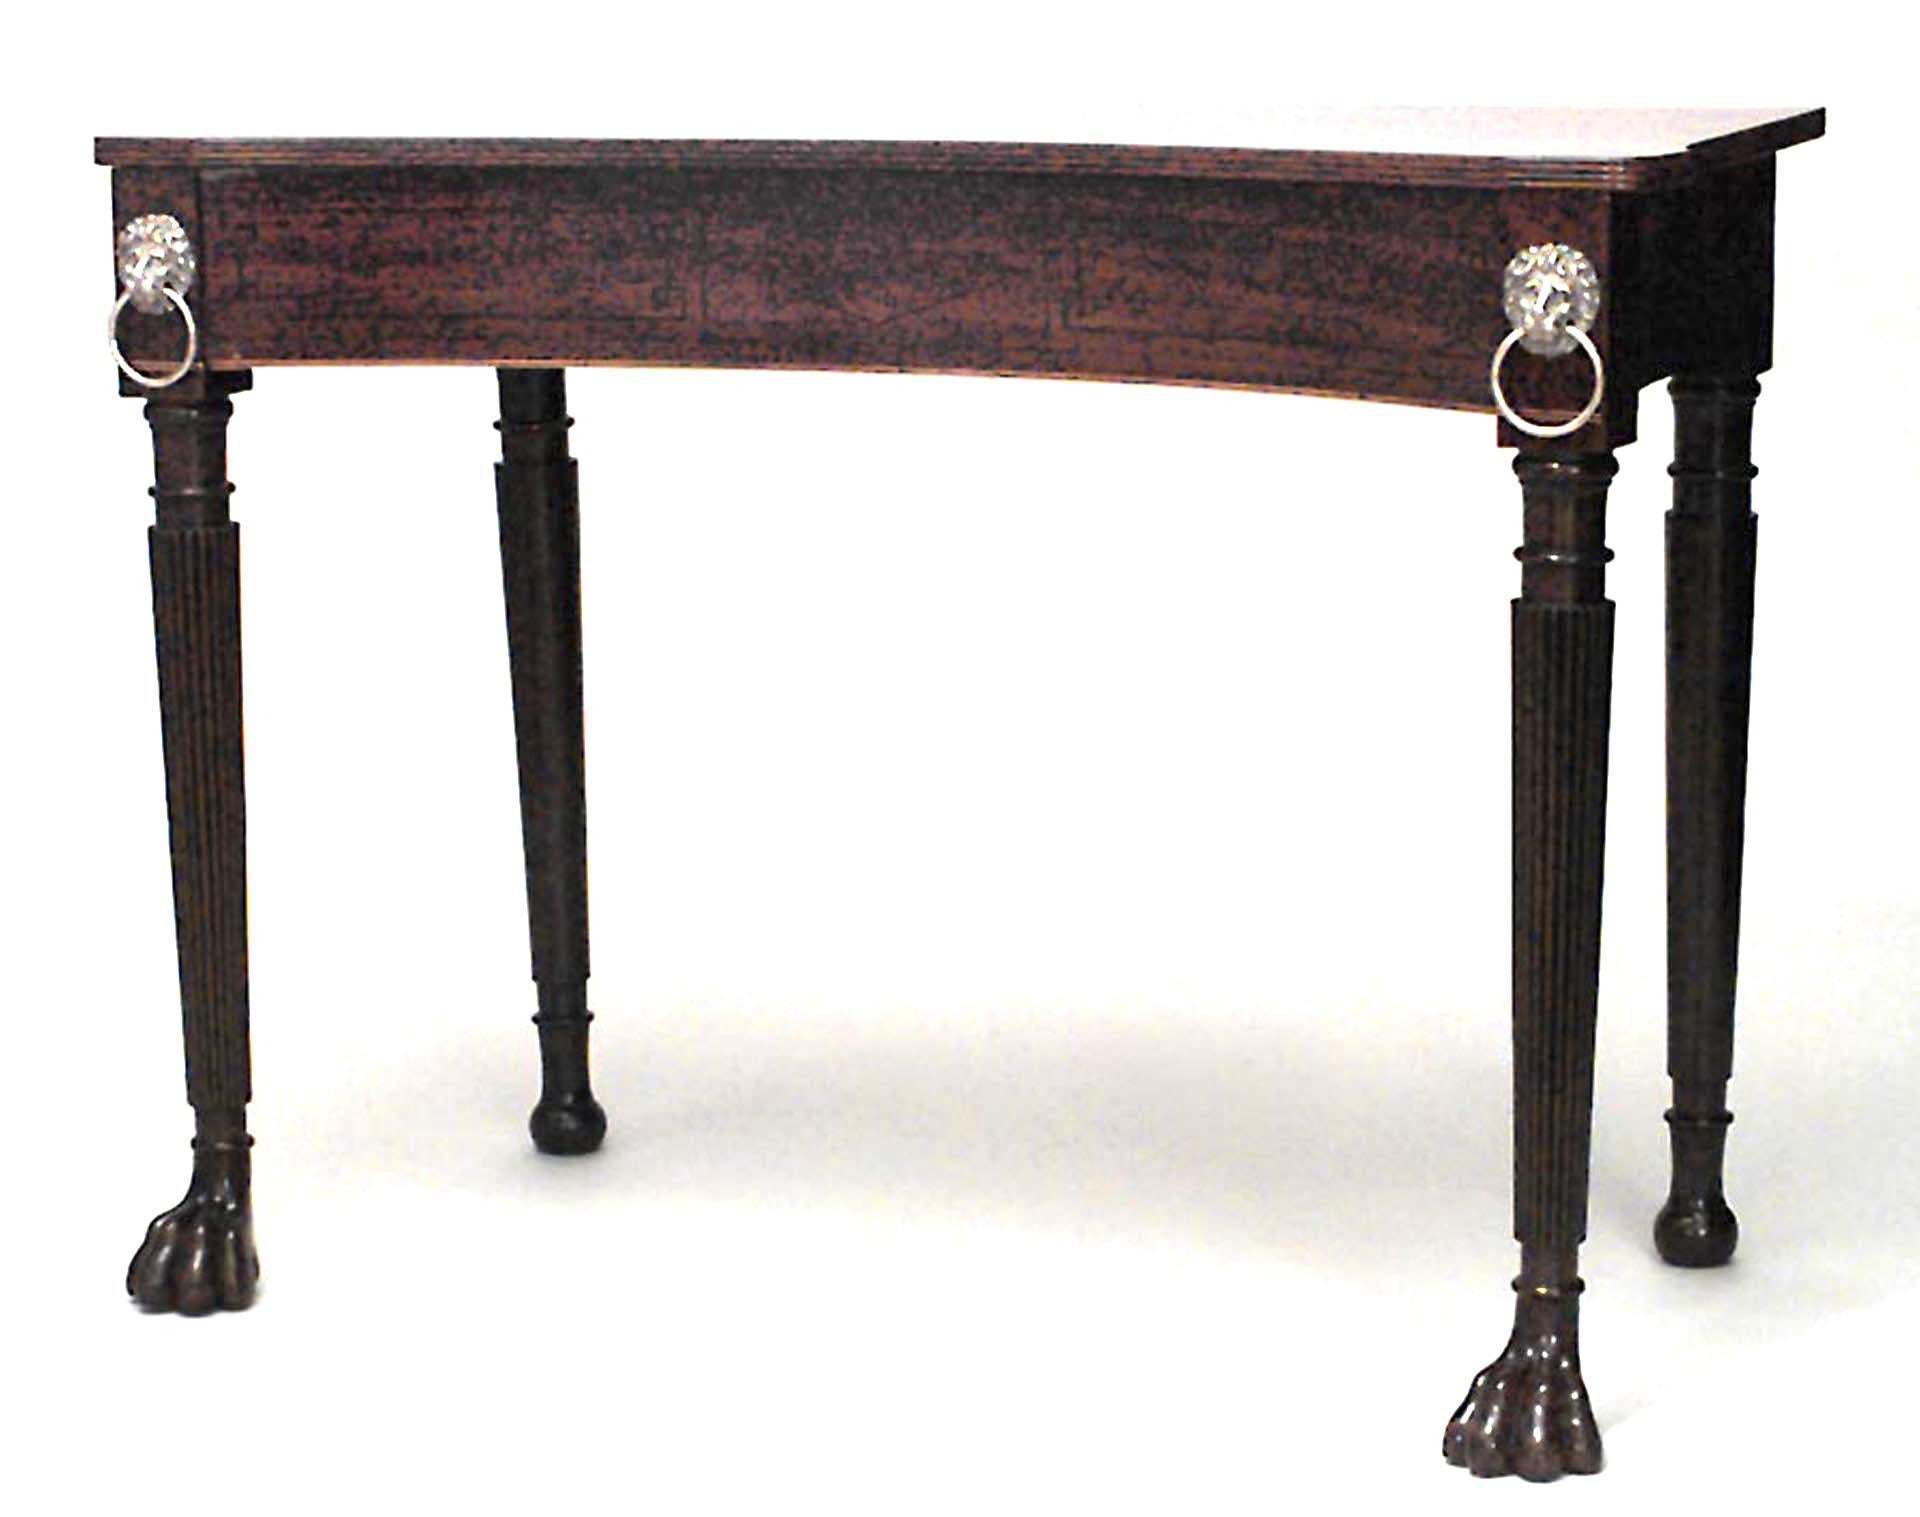 English Regency (Likely Irish, Early 19th Century) banded inlaid mahogany console table with concave front above lion headed reeded turned legs with paw feet.
